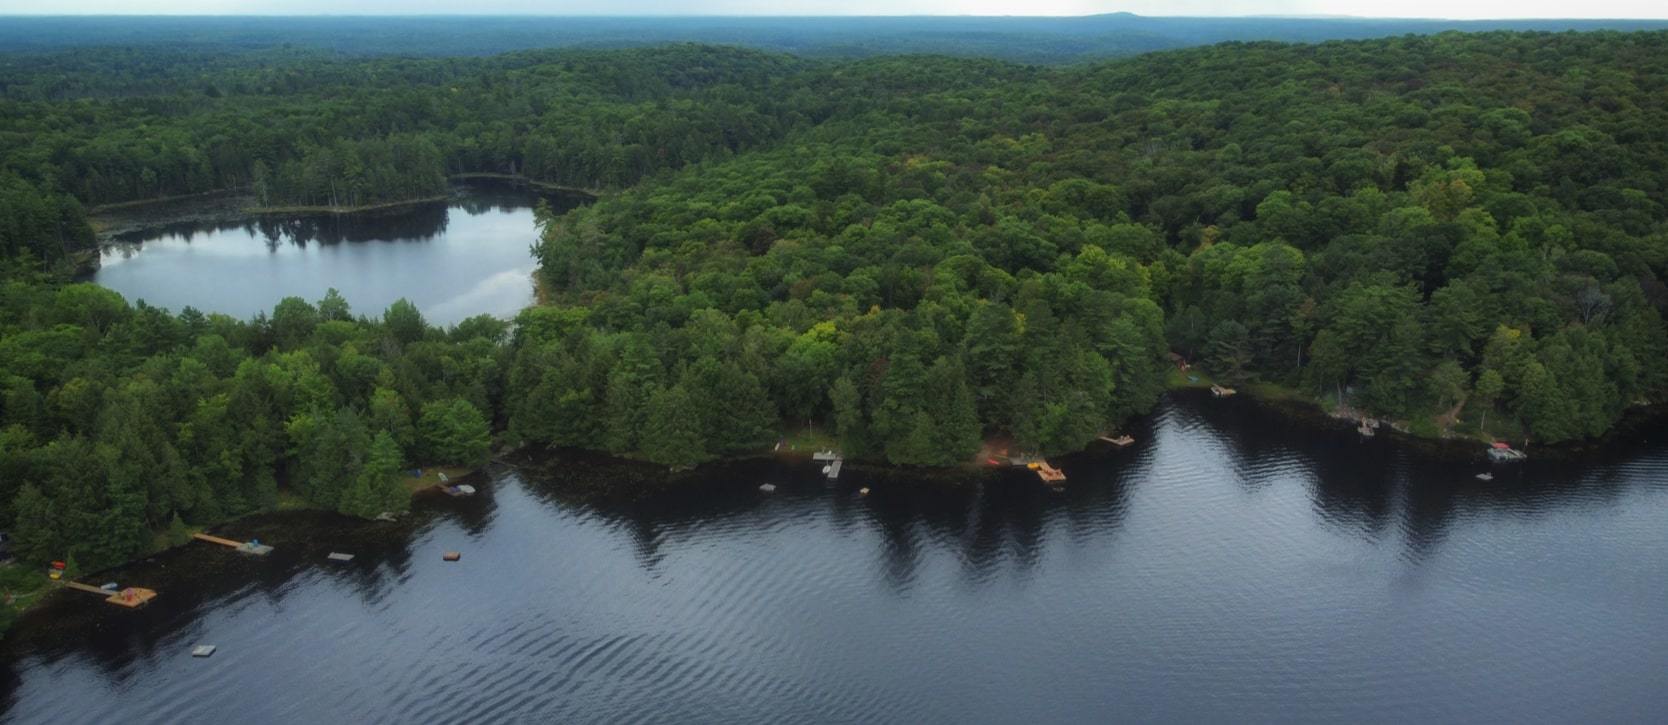 Overhead shot of beautiful blue lake and forestry in Highlands East, Haliburton